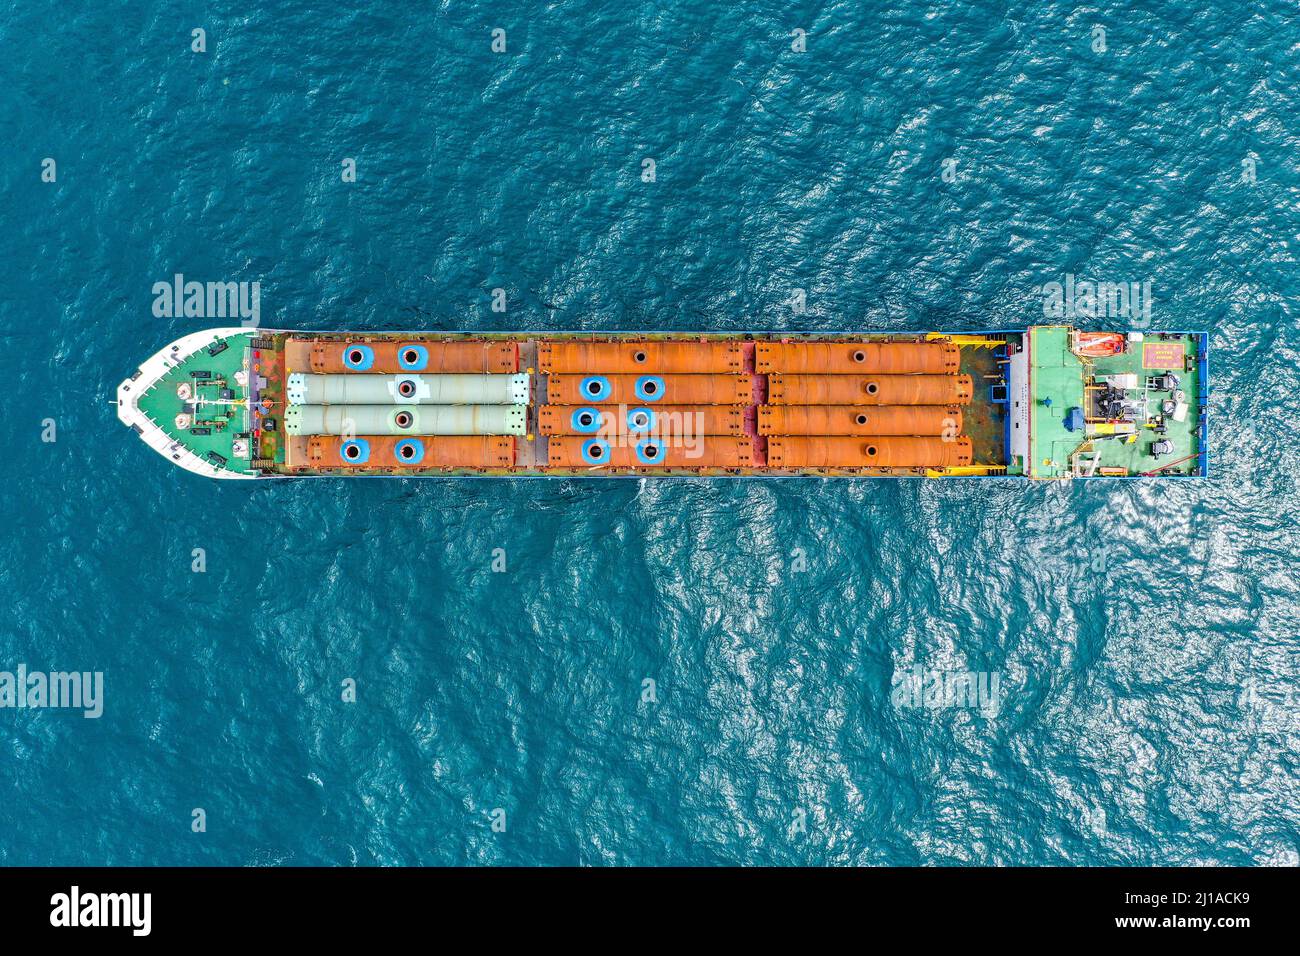 Cargo Ship with a load of industrial cylinders anchored at sea, Aerial view. Stock Photo